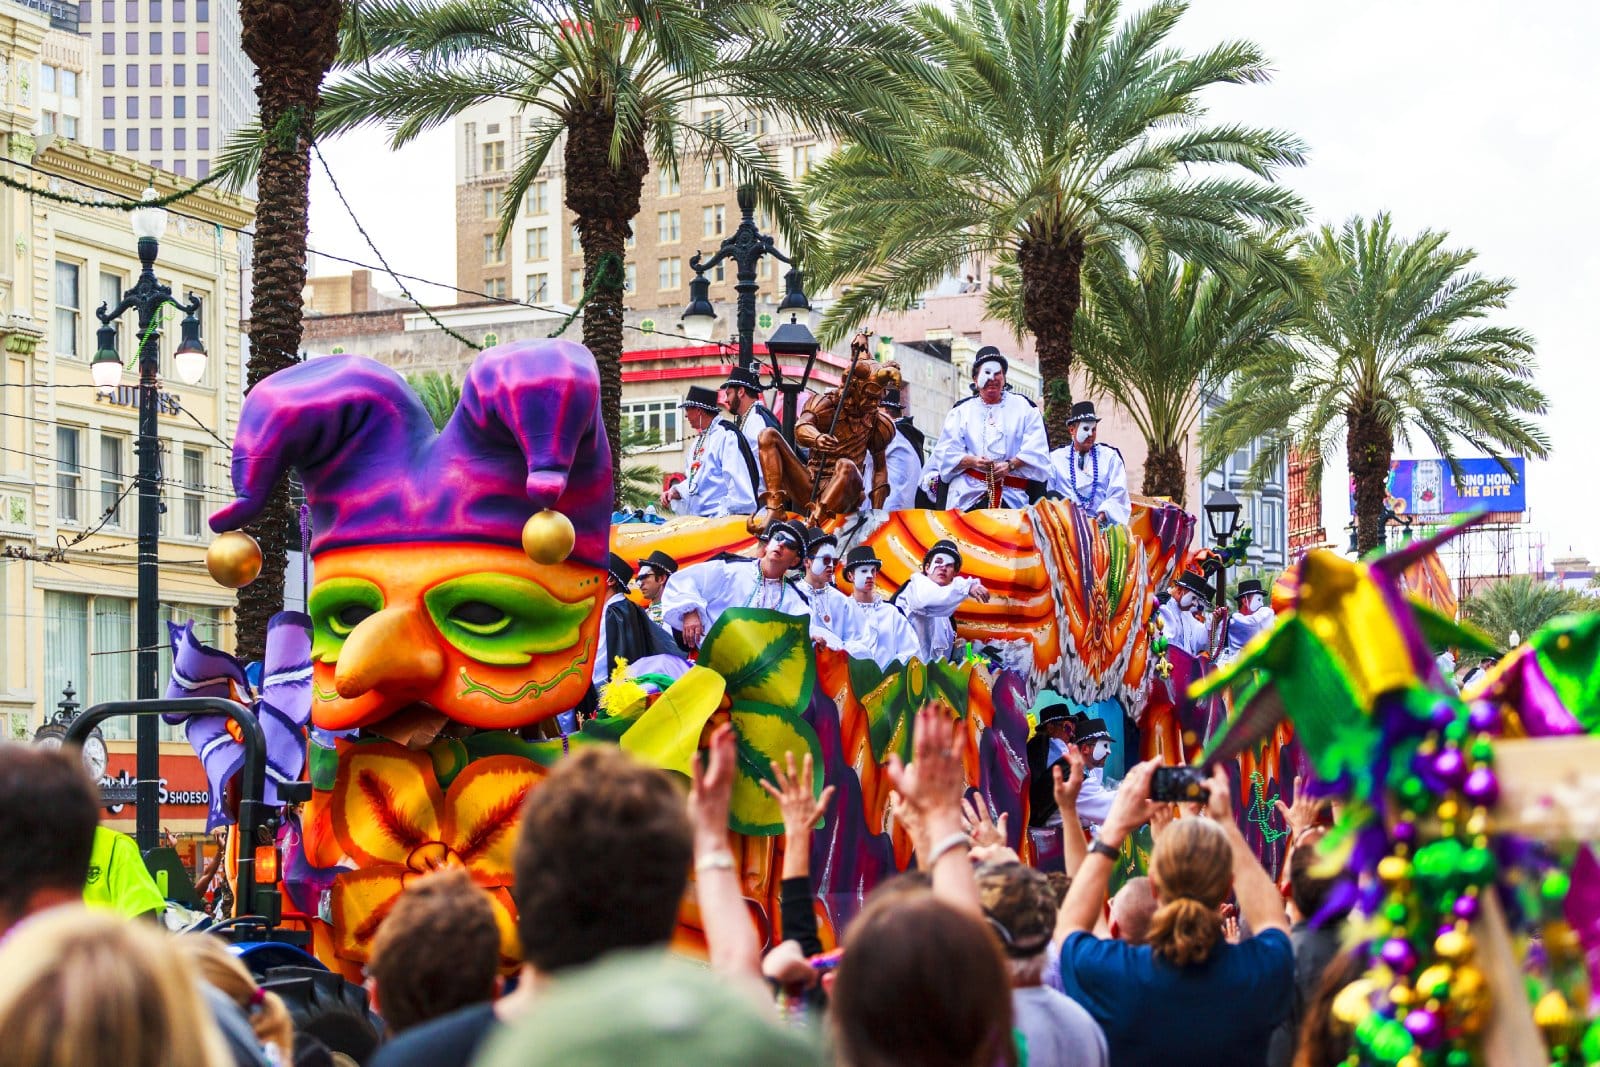 <p>Tourism in Louisiana, particularly New Orleans, generates over $18.9 billion. Mardi Gras festivities are free to watch but attending balls or exclusive events can be costly.</p>